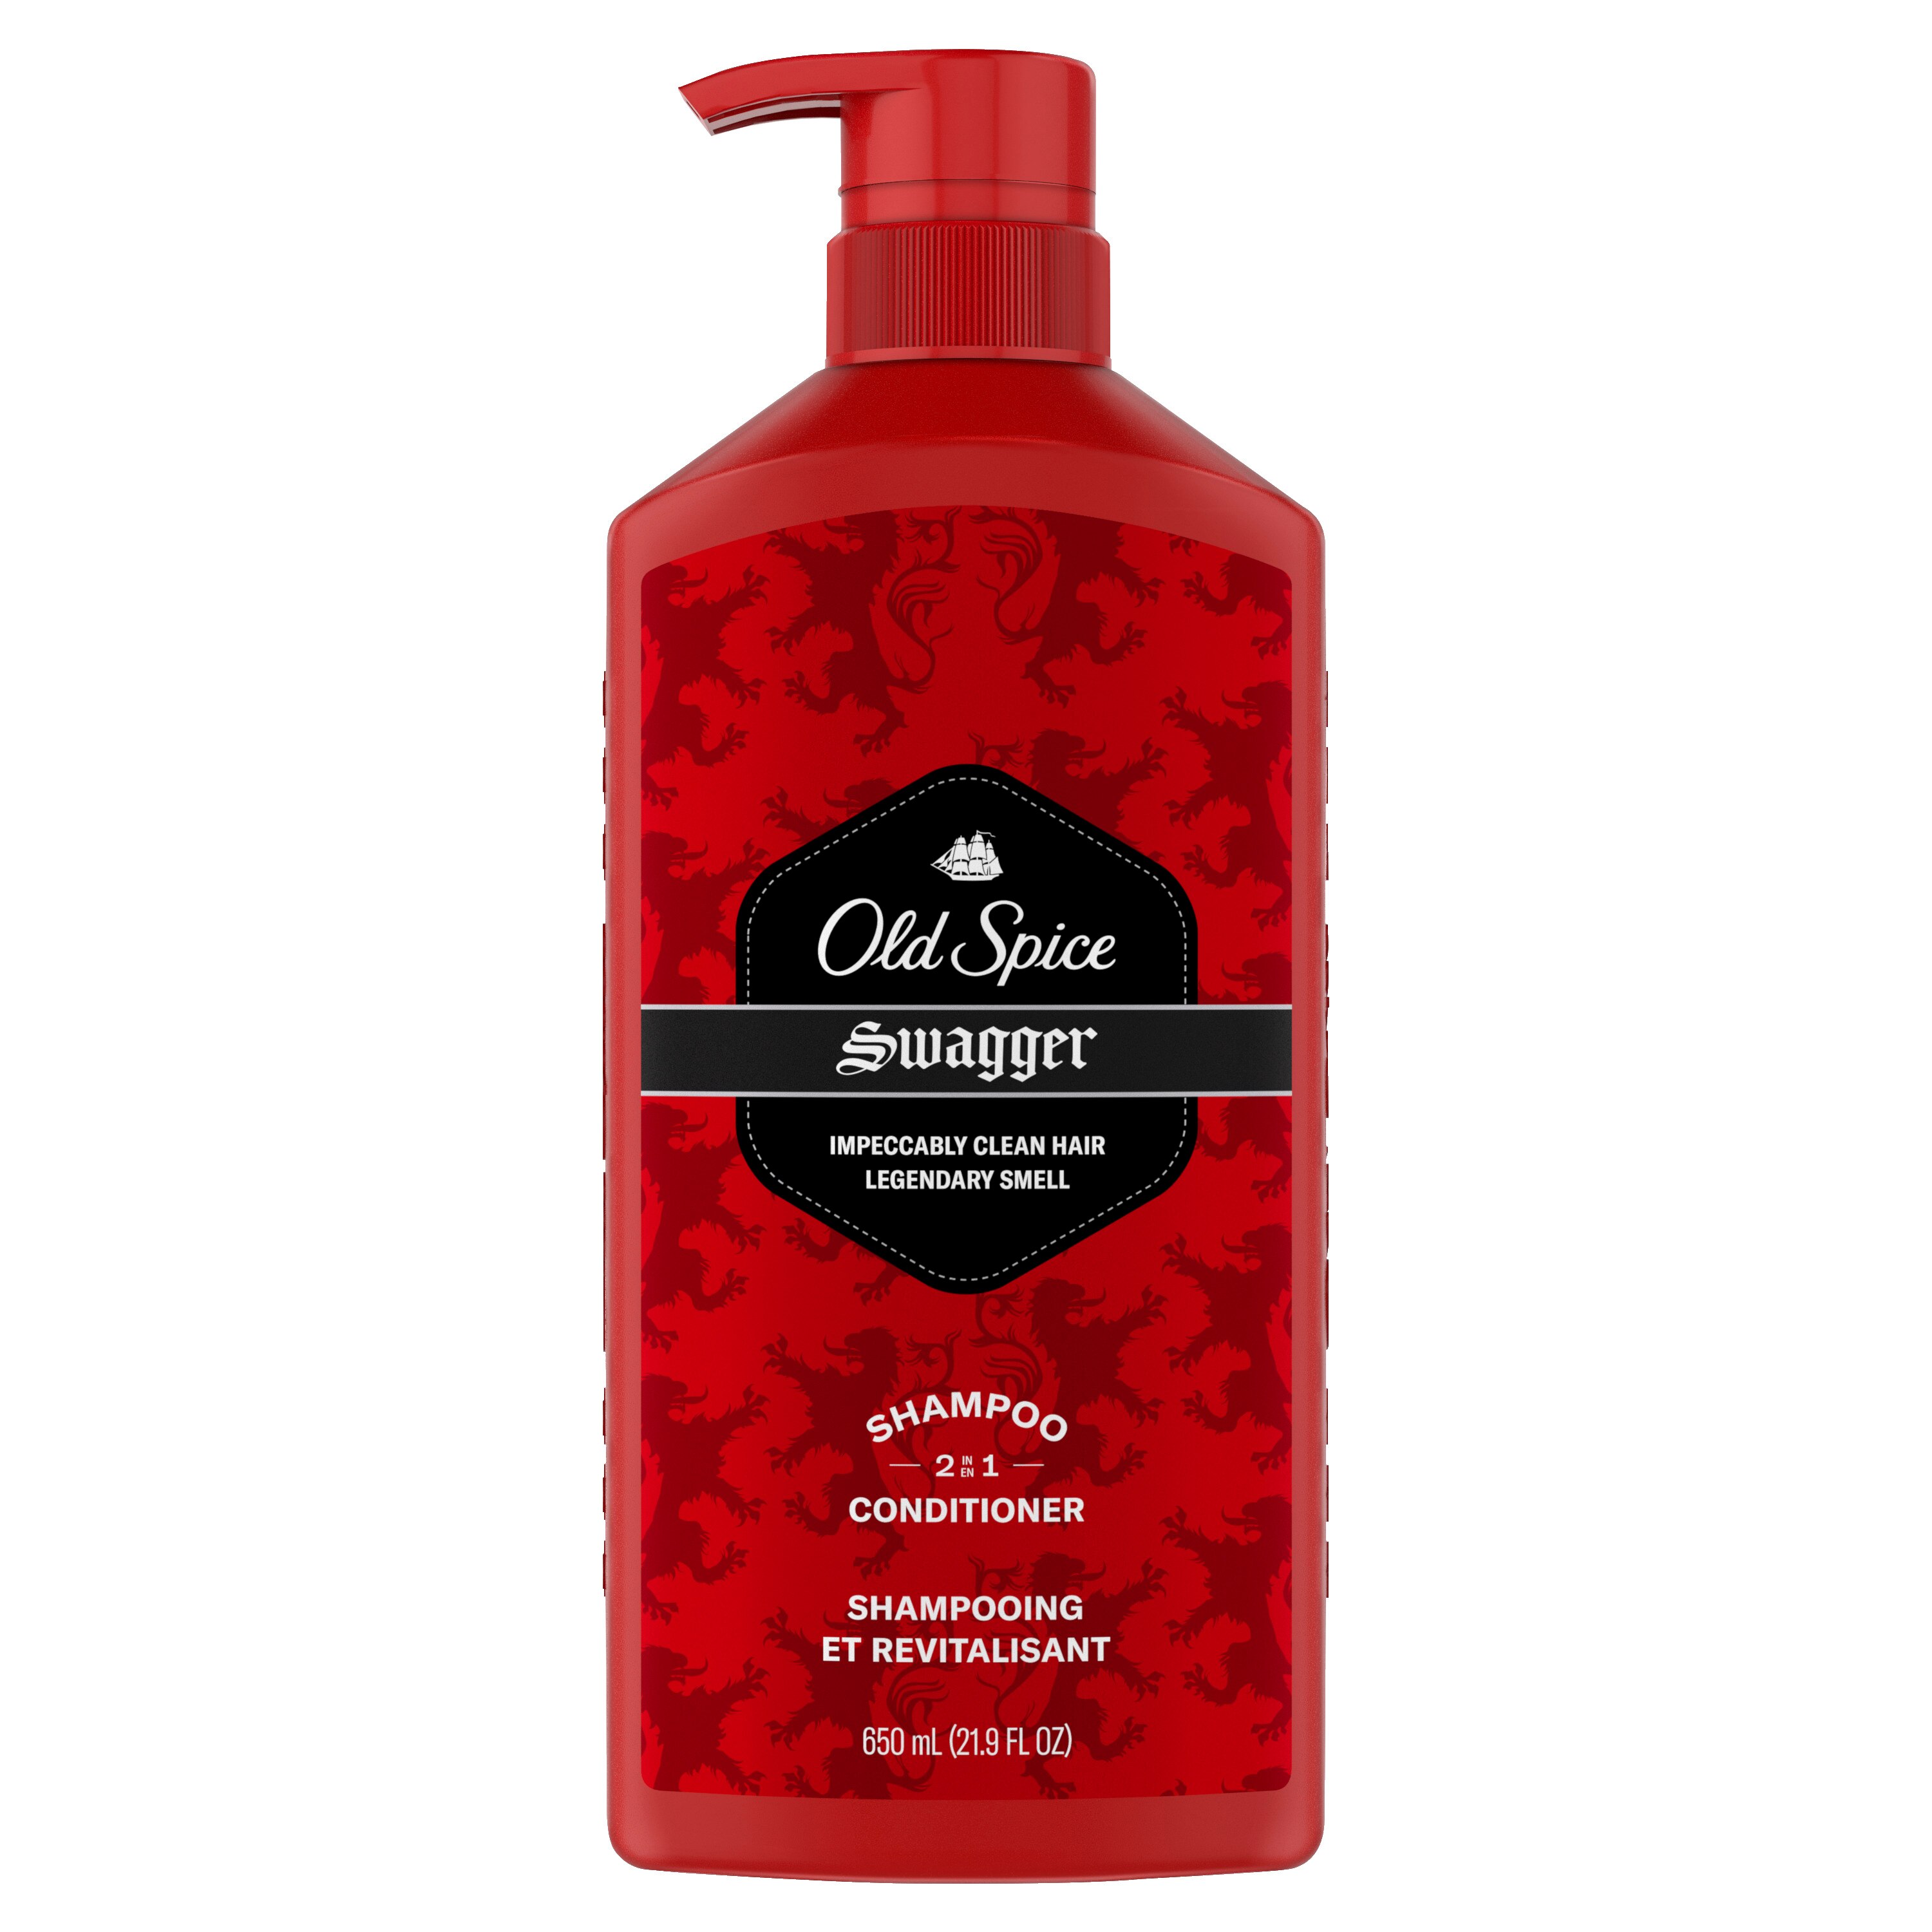 Old Spice Swagger 2-in-1 Shampoo & Conditioner